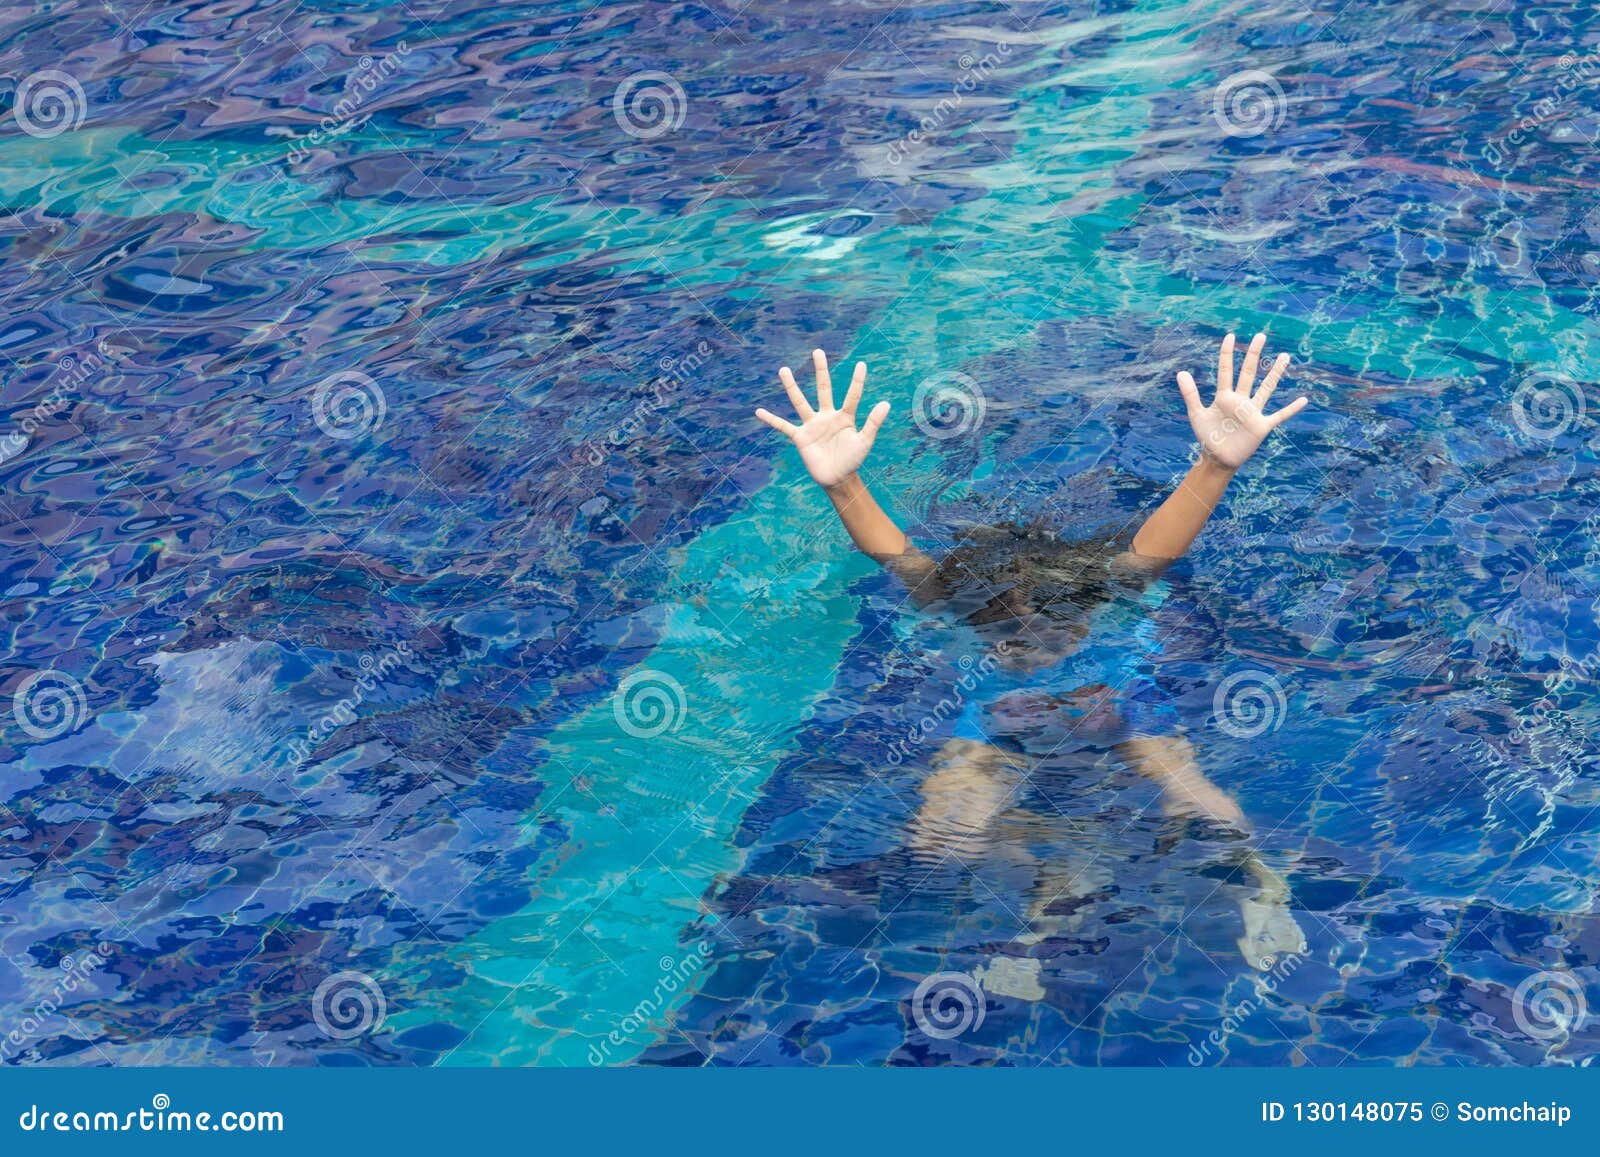 drowning child